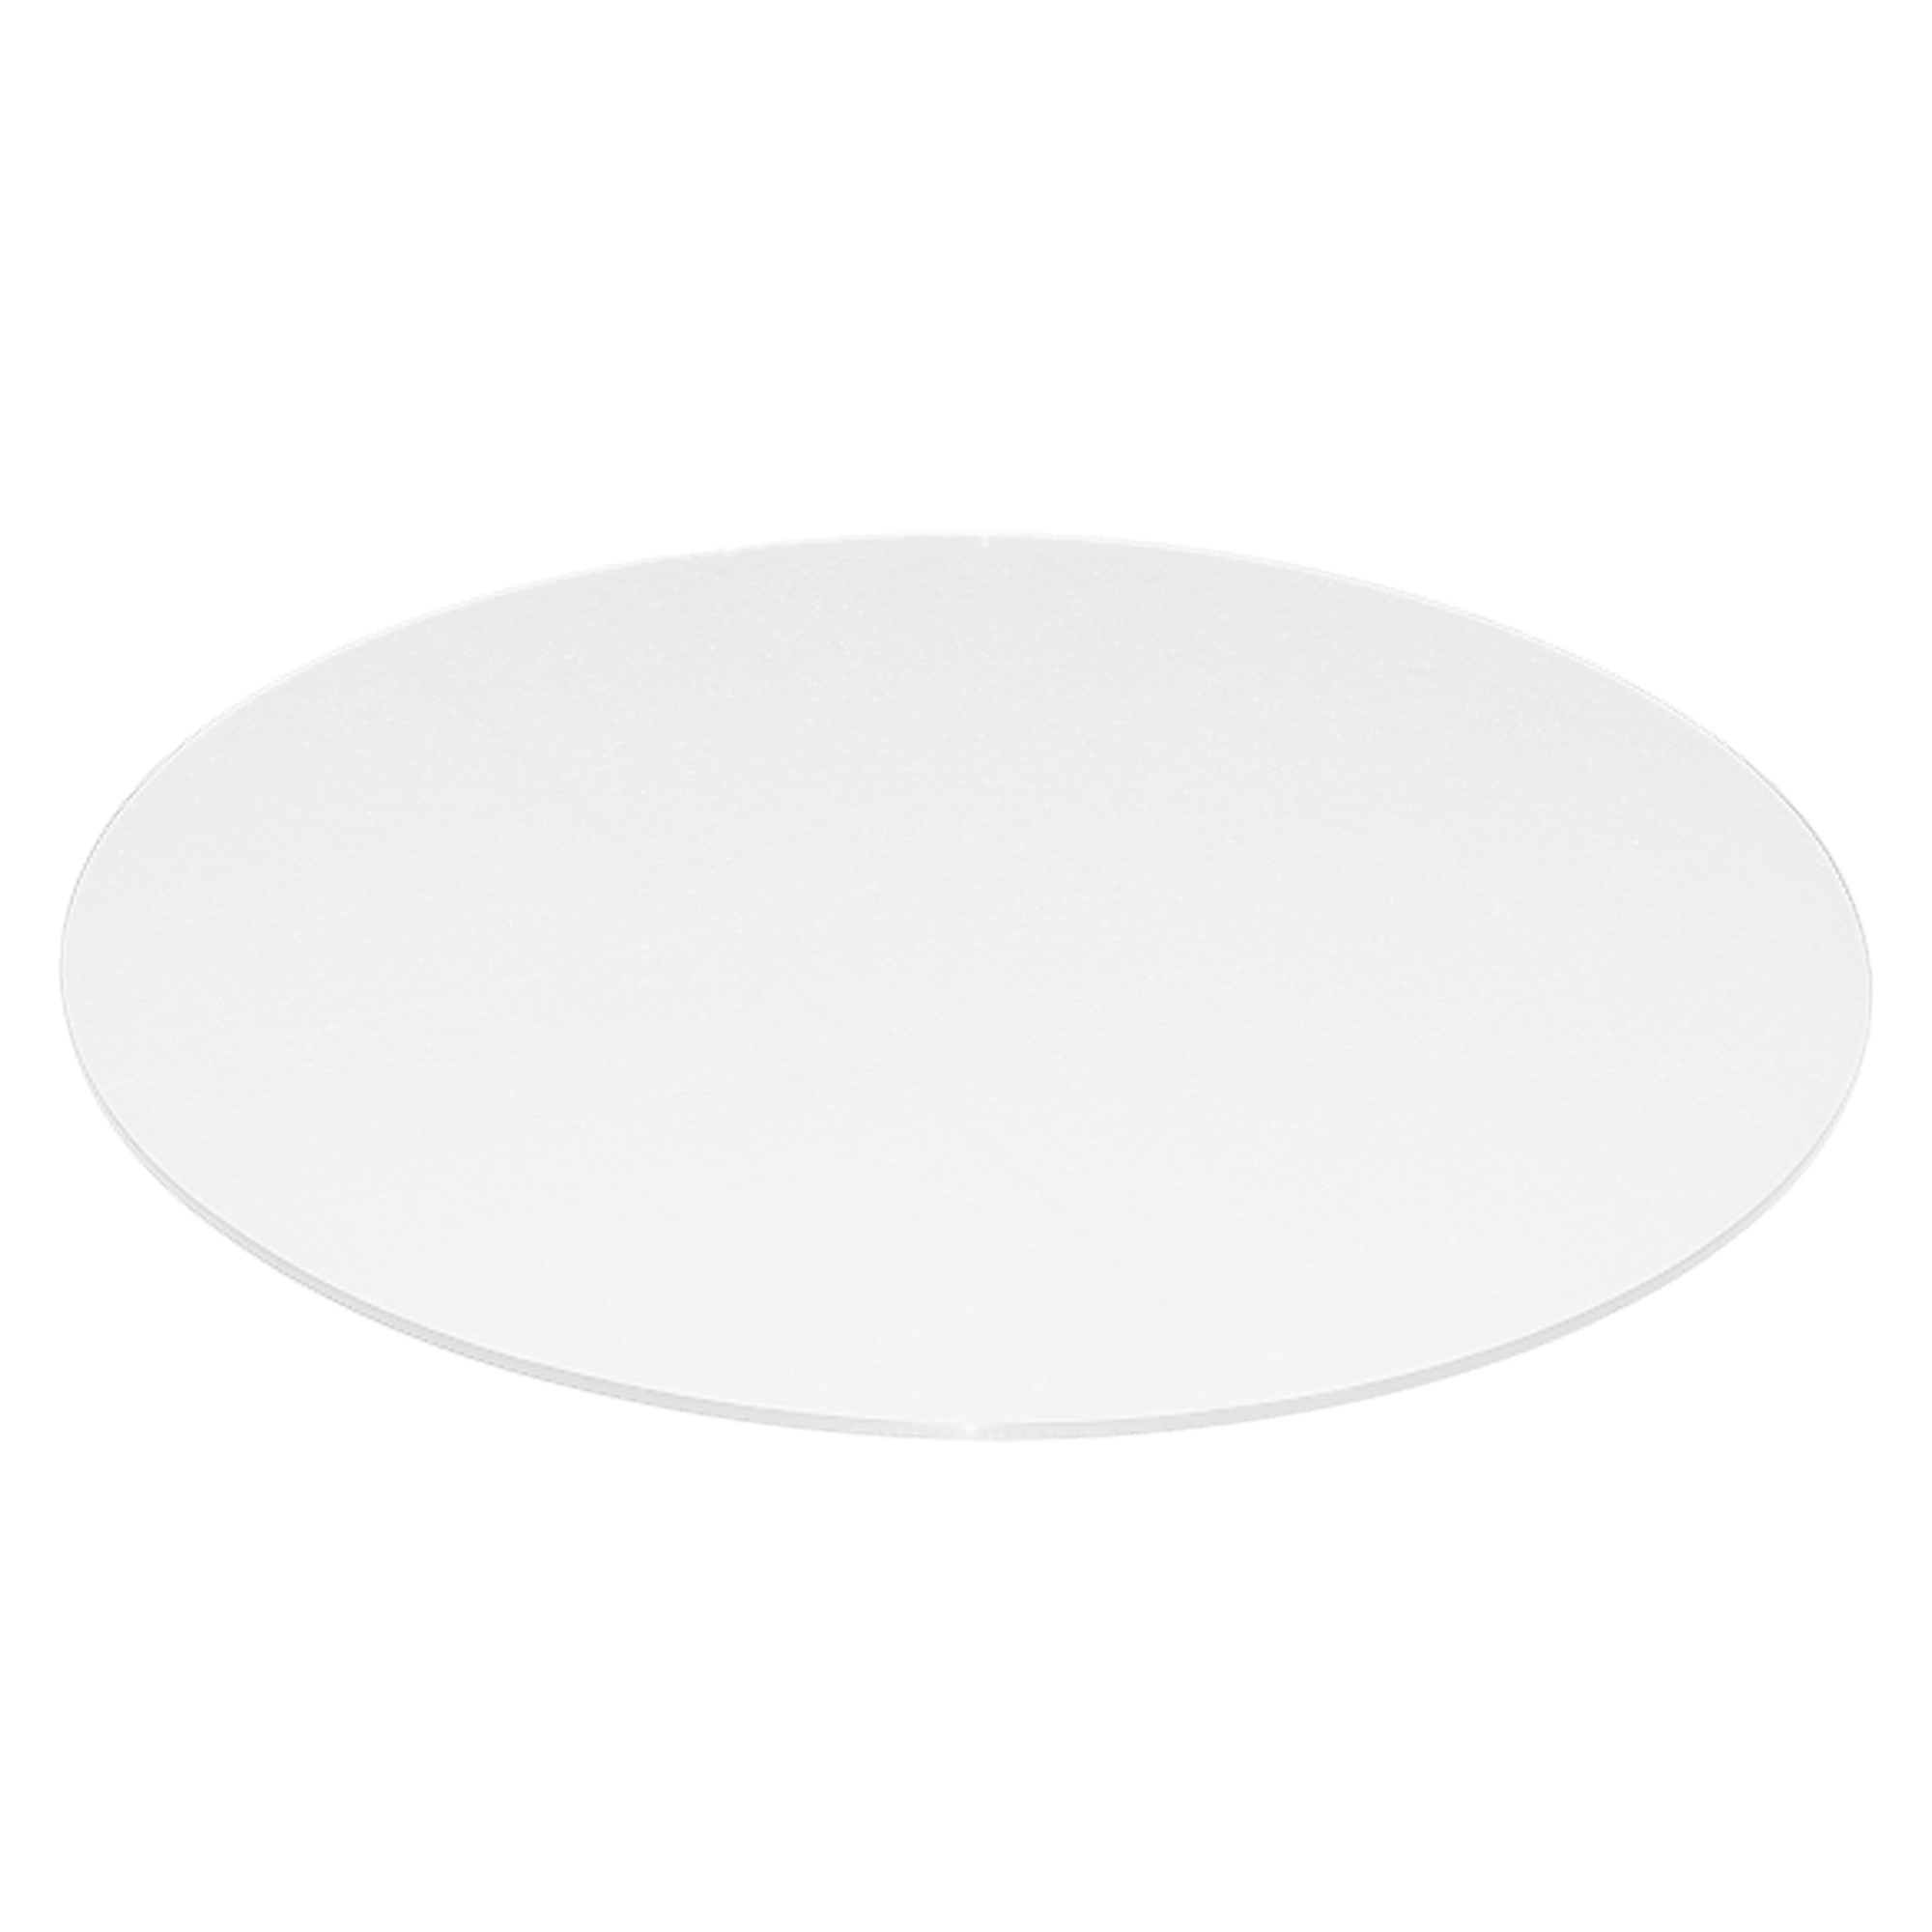 Glass Table Top 34 White Round Back, Round White Table Top